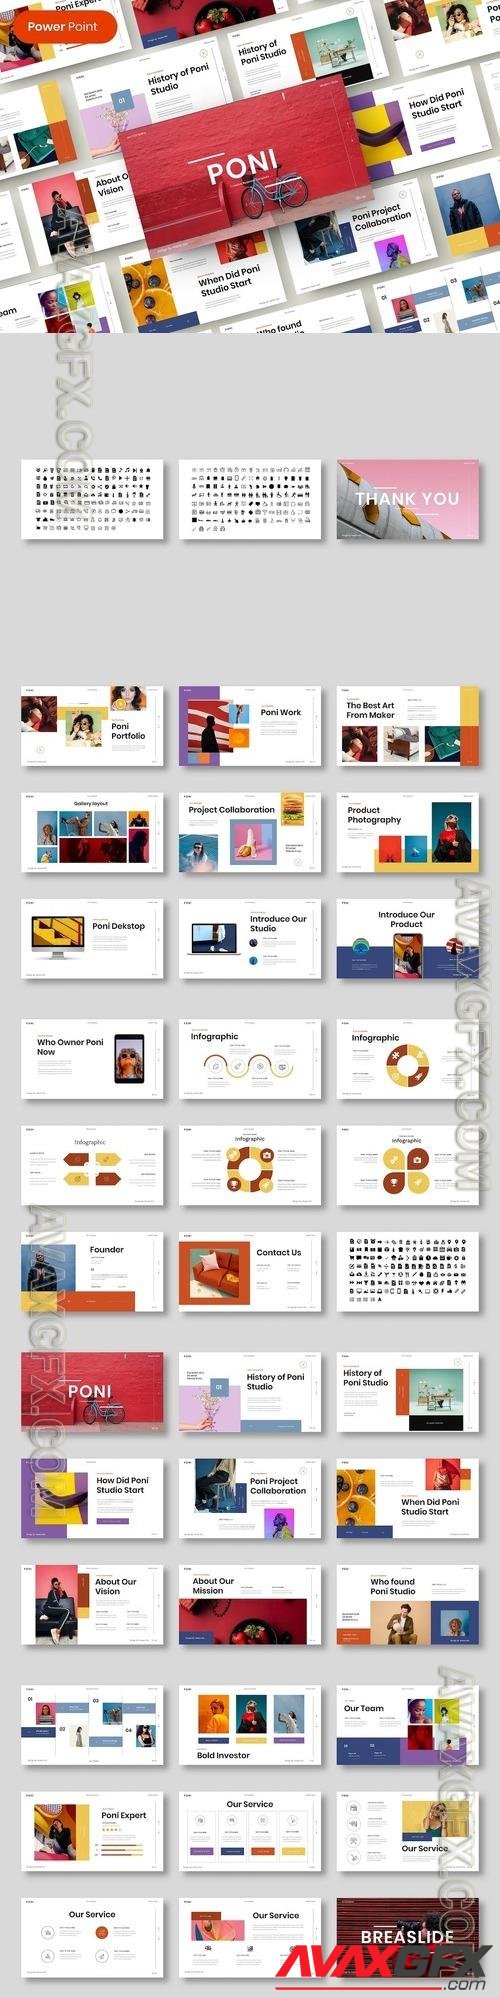 Poni – Business PowerPoint Template